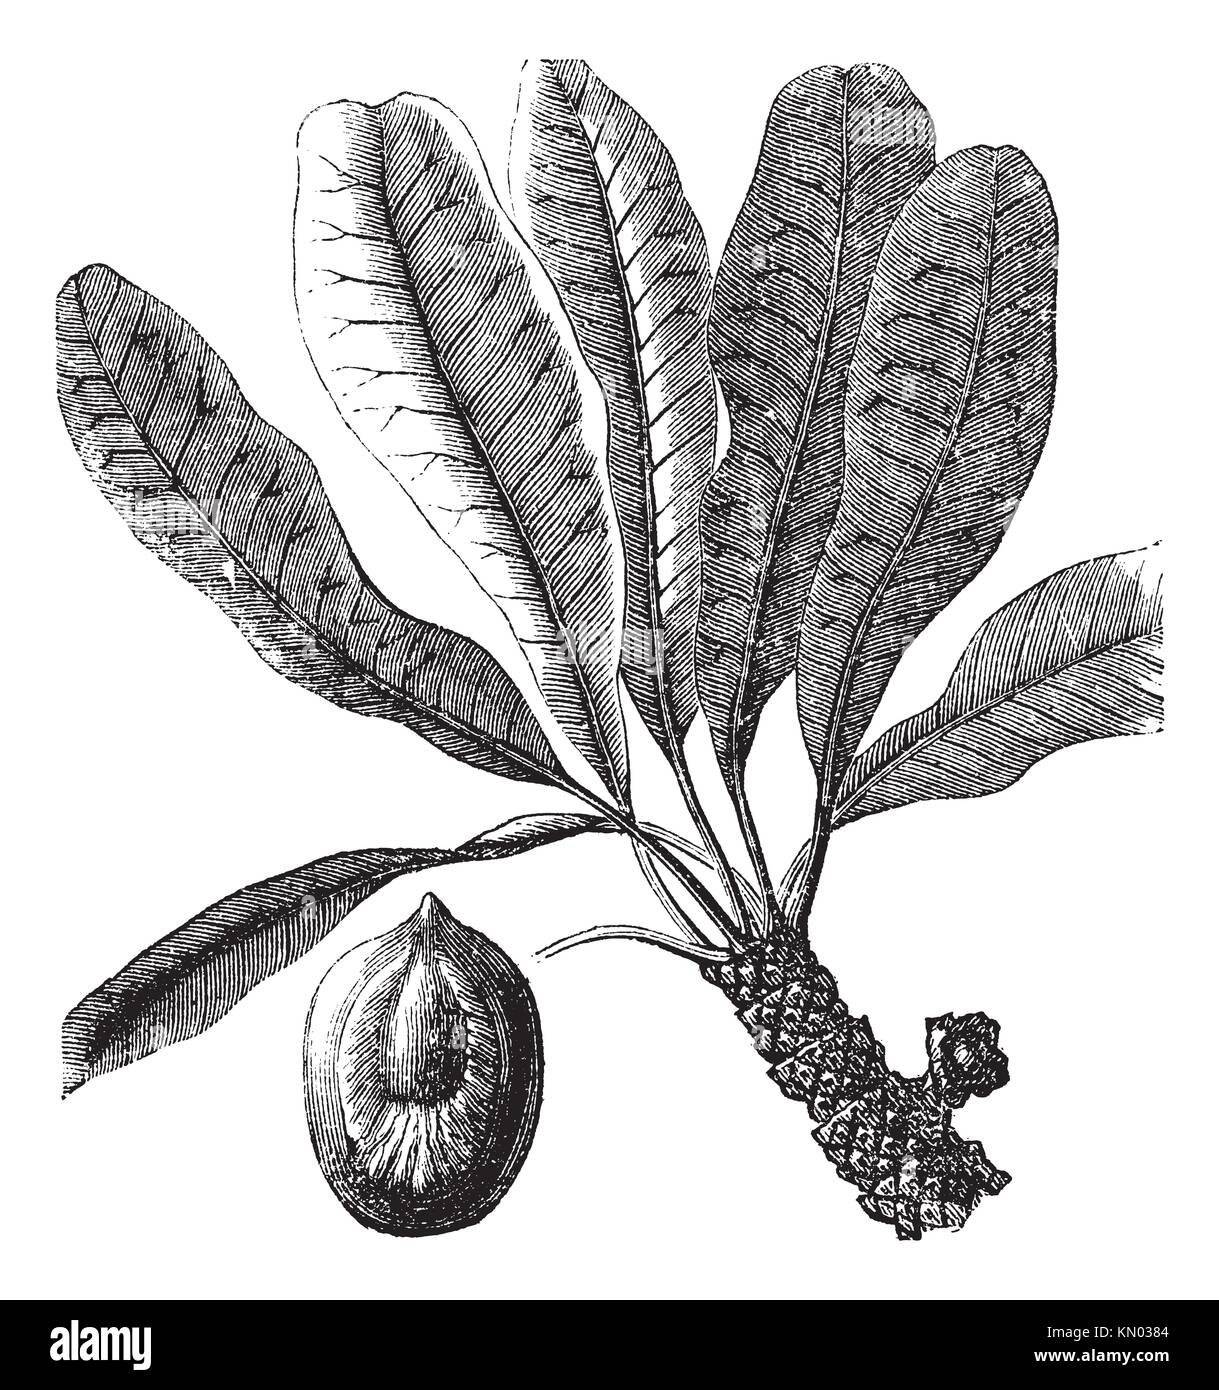 Bassia or Bassia sp , vintage engraving  Old engraved illustration of a Bassia plant showing seed lower left Stock Photo